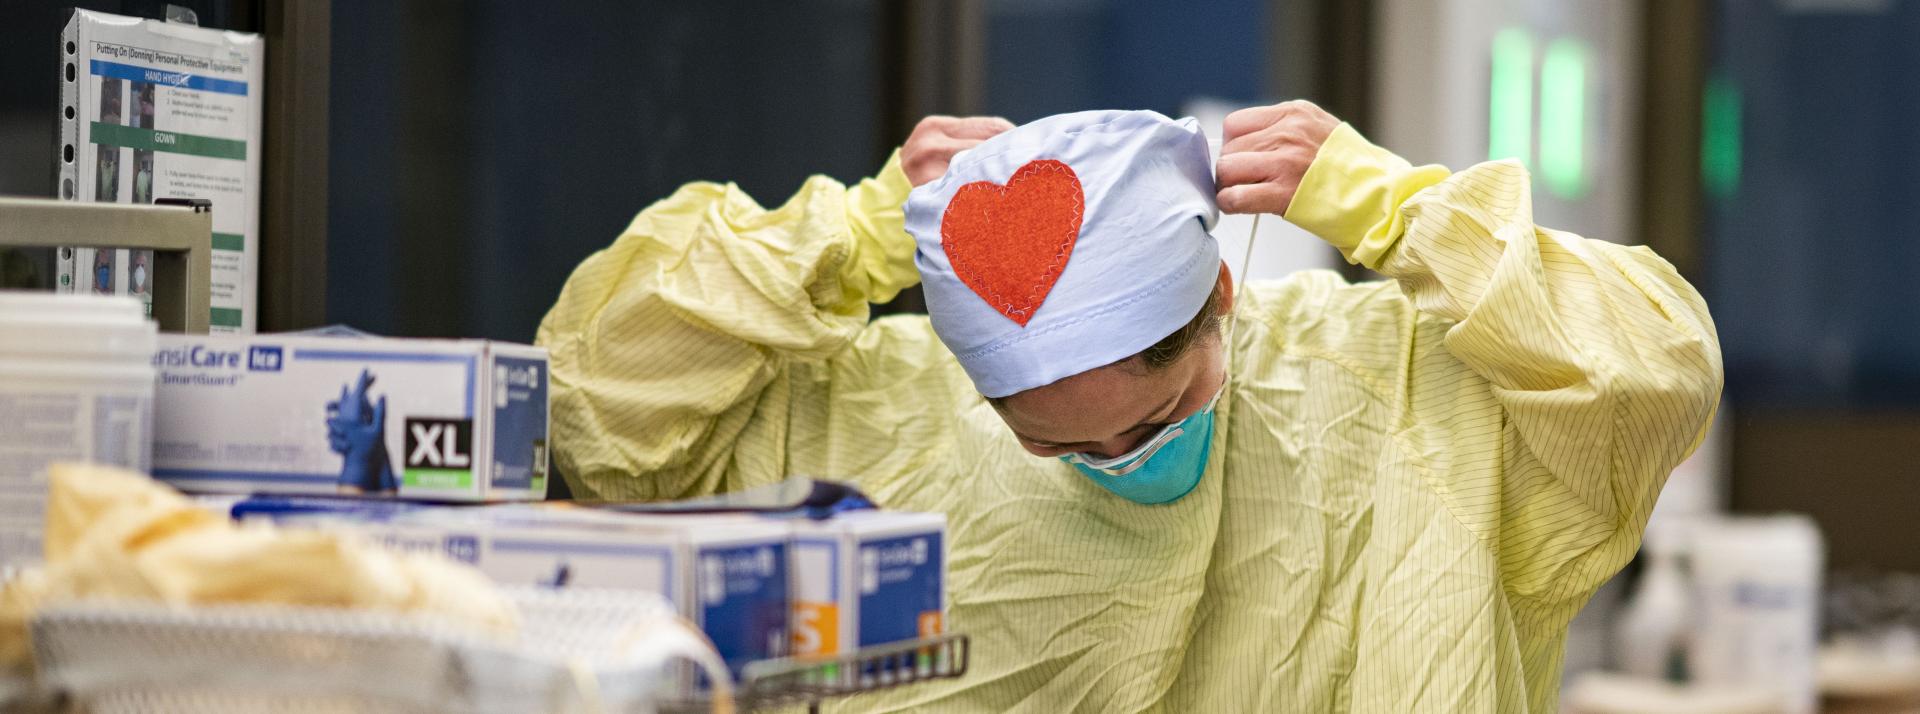 person with heart on cap putting on mask